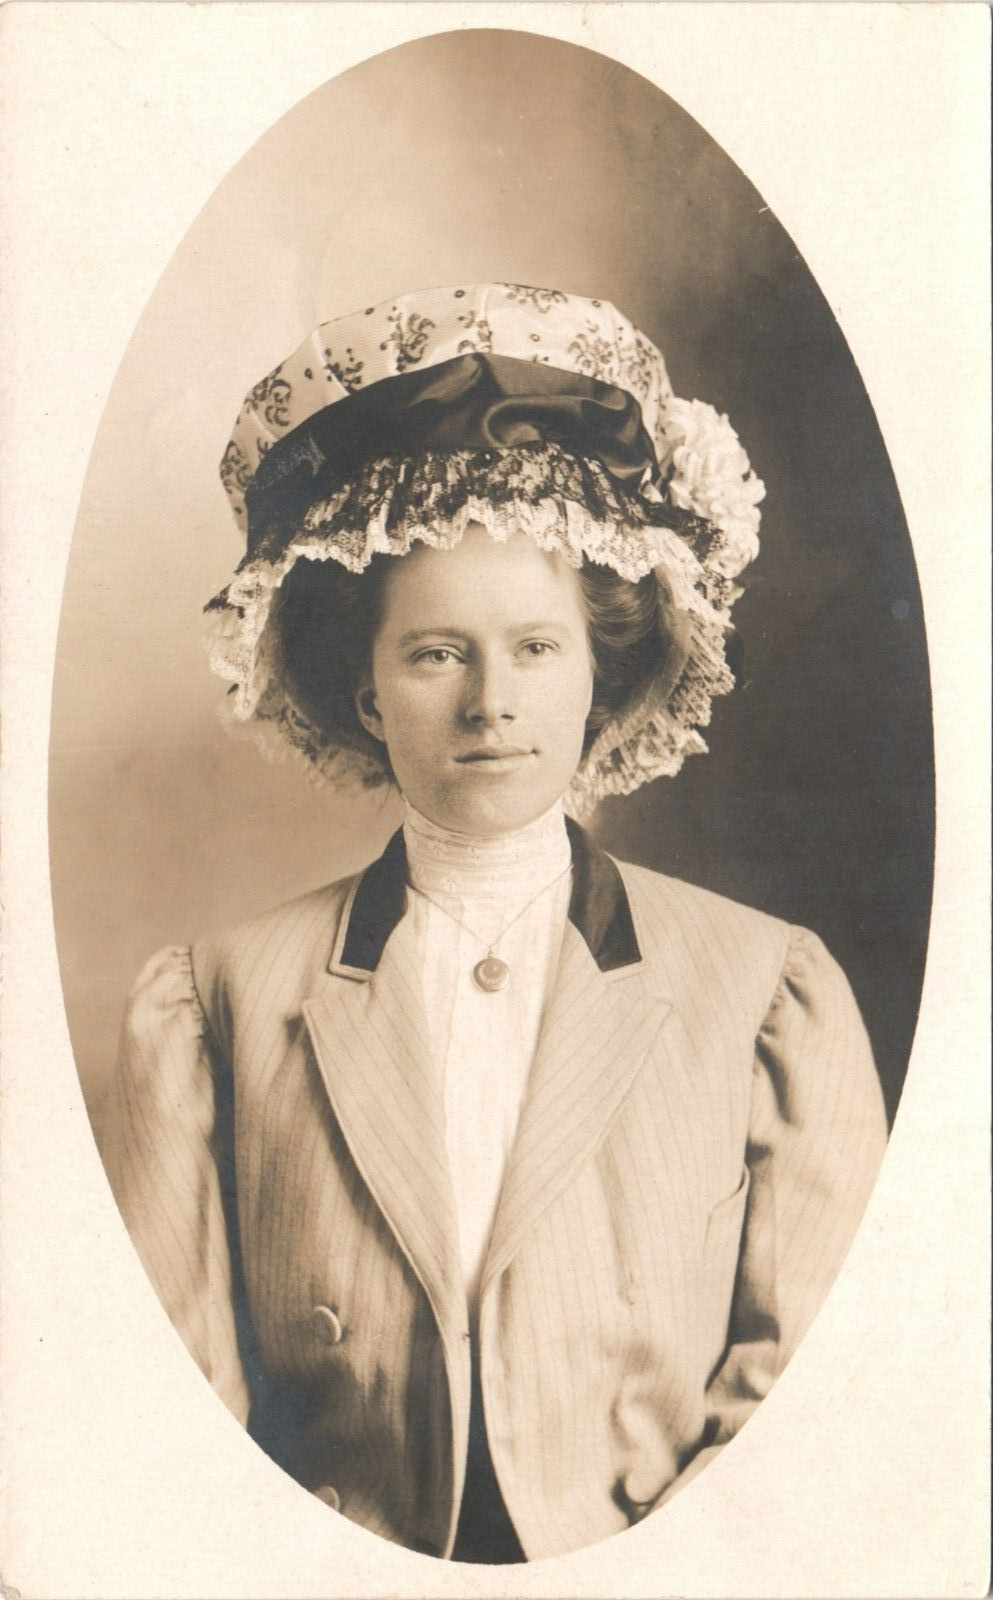 WOMAN WITH BIG HAT antique real photo postcard rppc SIOUX FALLS SOUTH DAKOTA SD